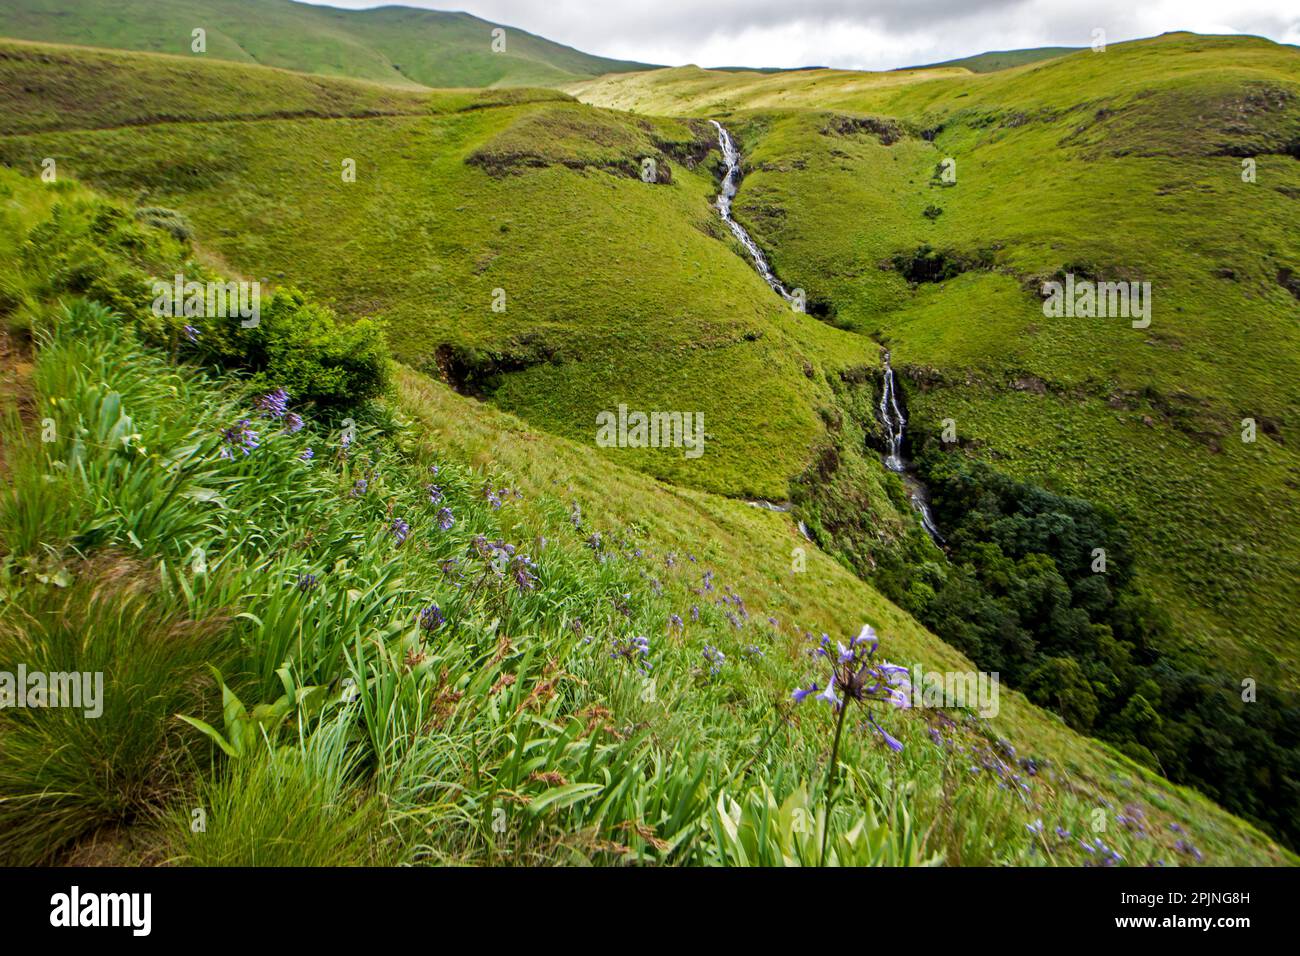 Picturesque view of the Mahai falls, with wild agapanthus flowering in the foreground. Stock Photo